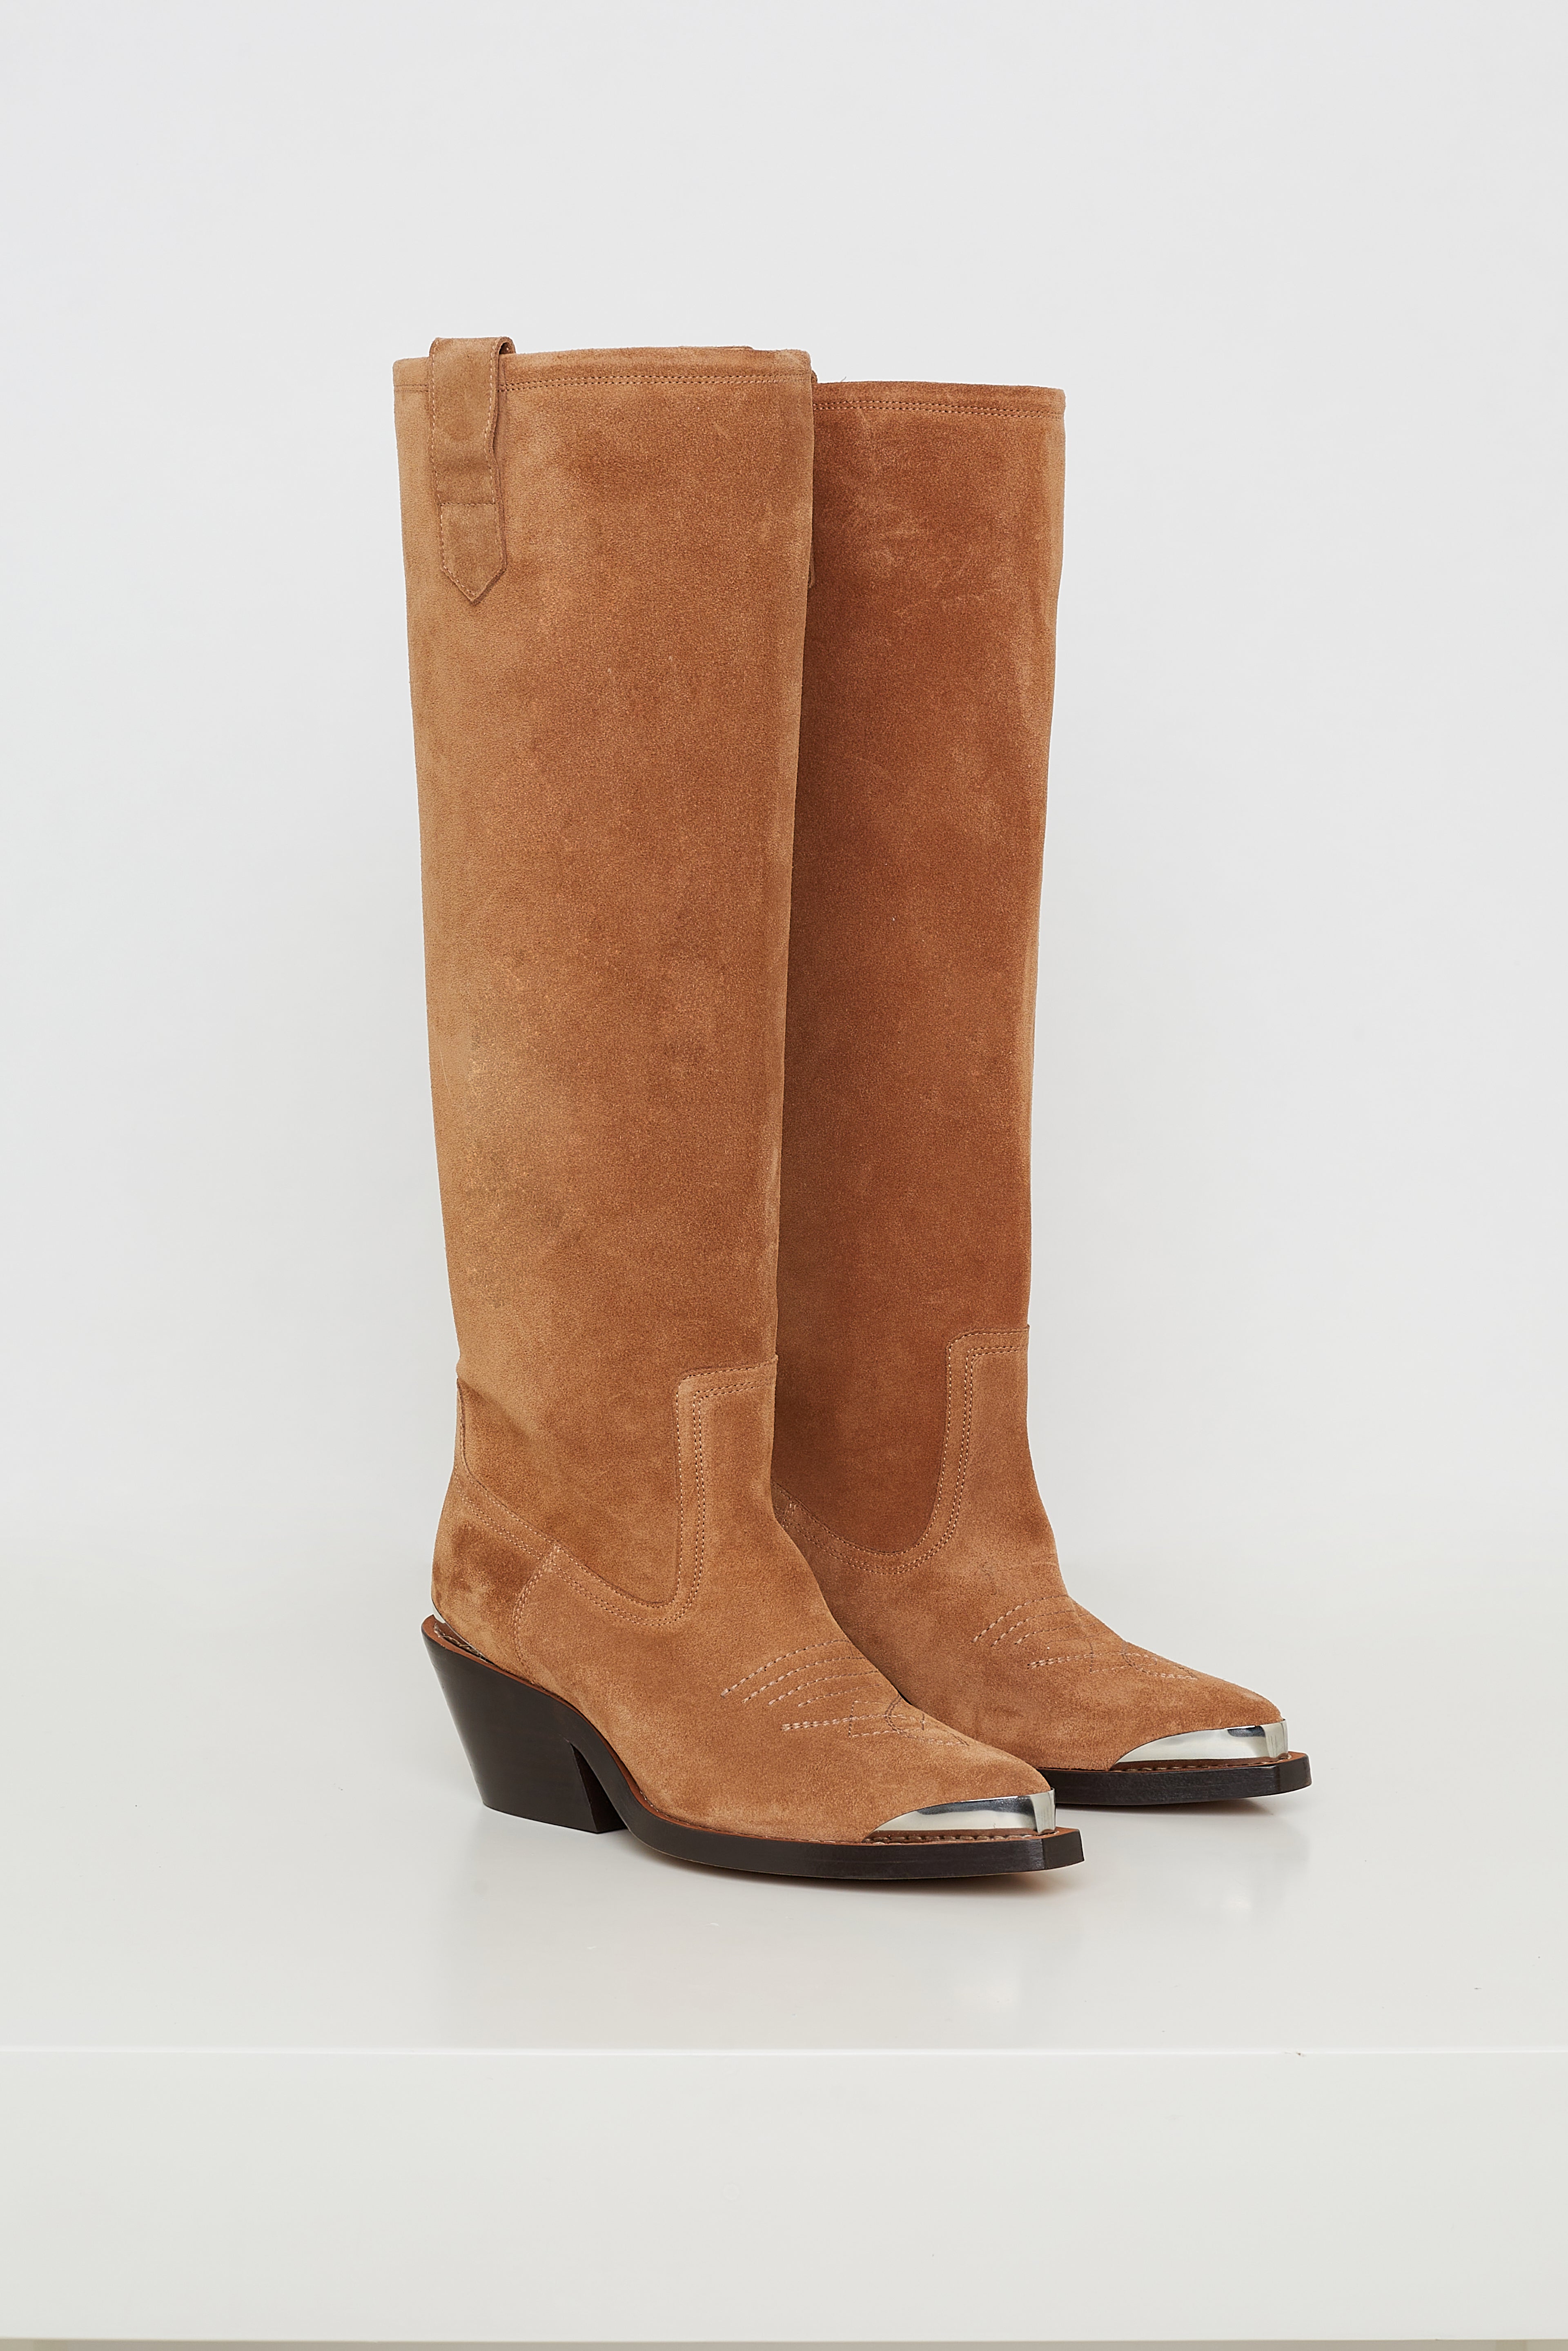 Dorothee-Schumacher-OUTLET-SALE-WESTERN-SUMMER-Tall-Boot-Stiefel-Stiefeletten-ARCHIVE-COLLECTION.jpg